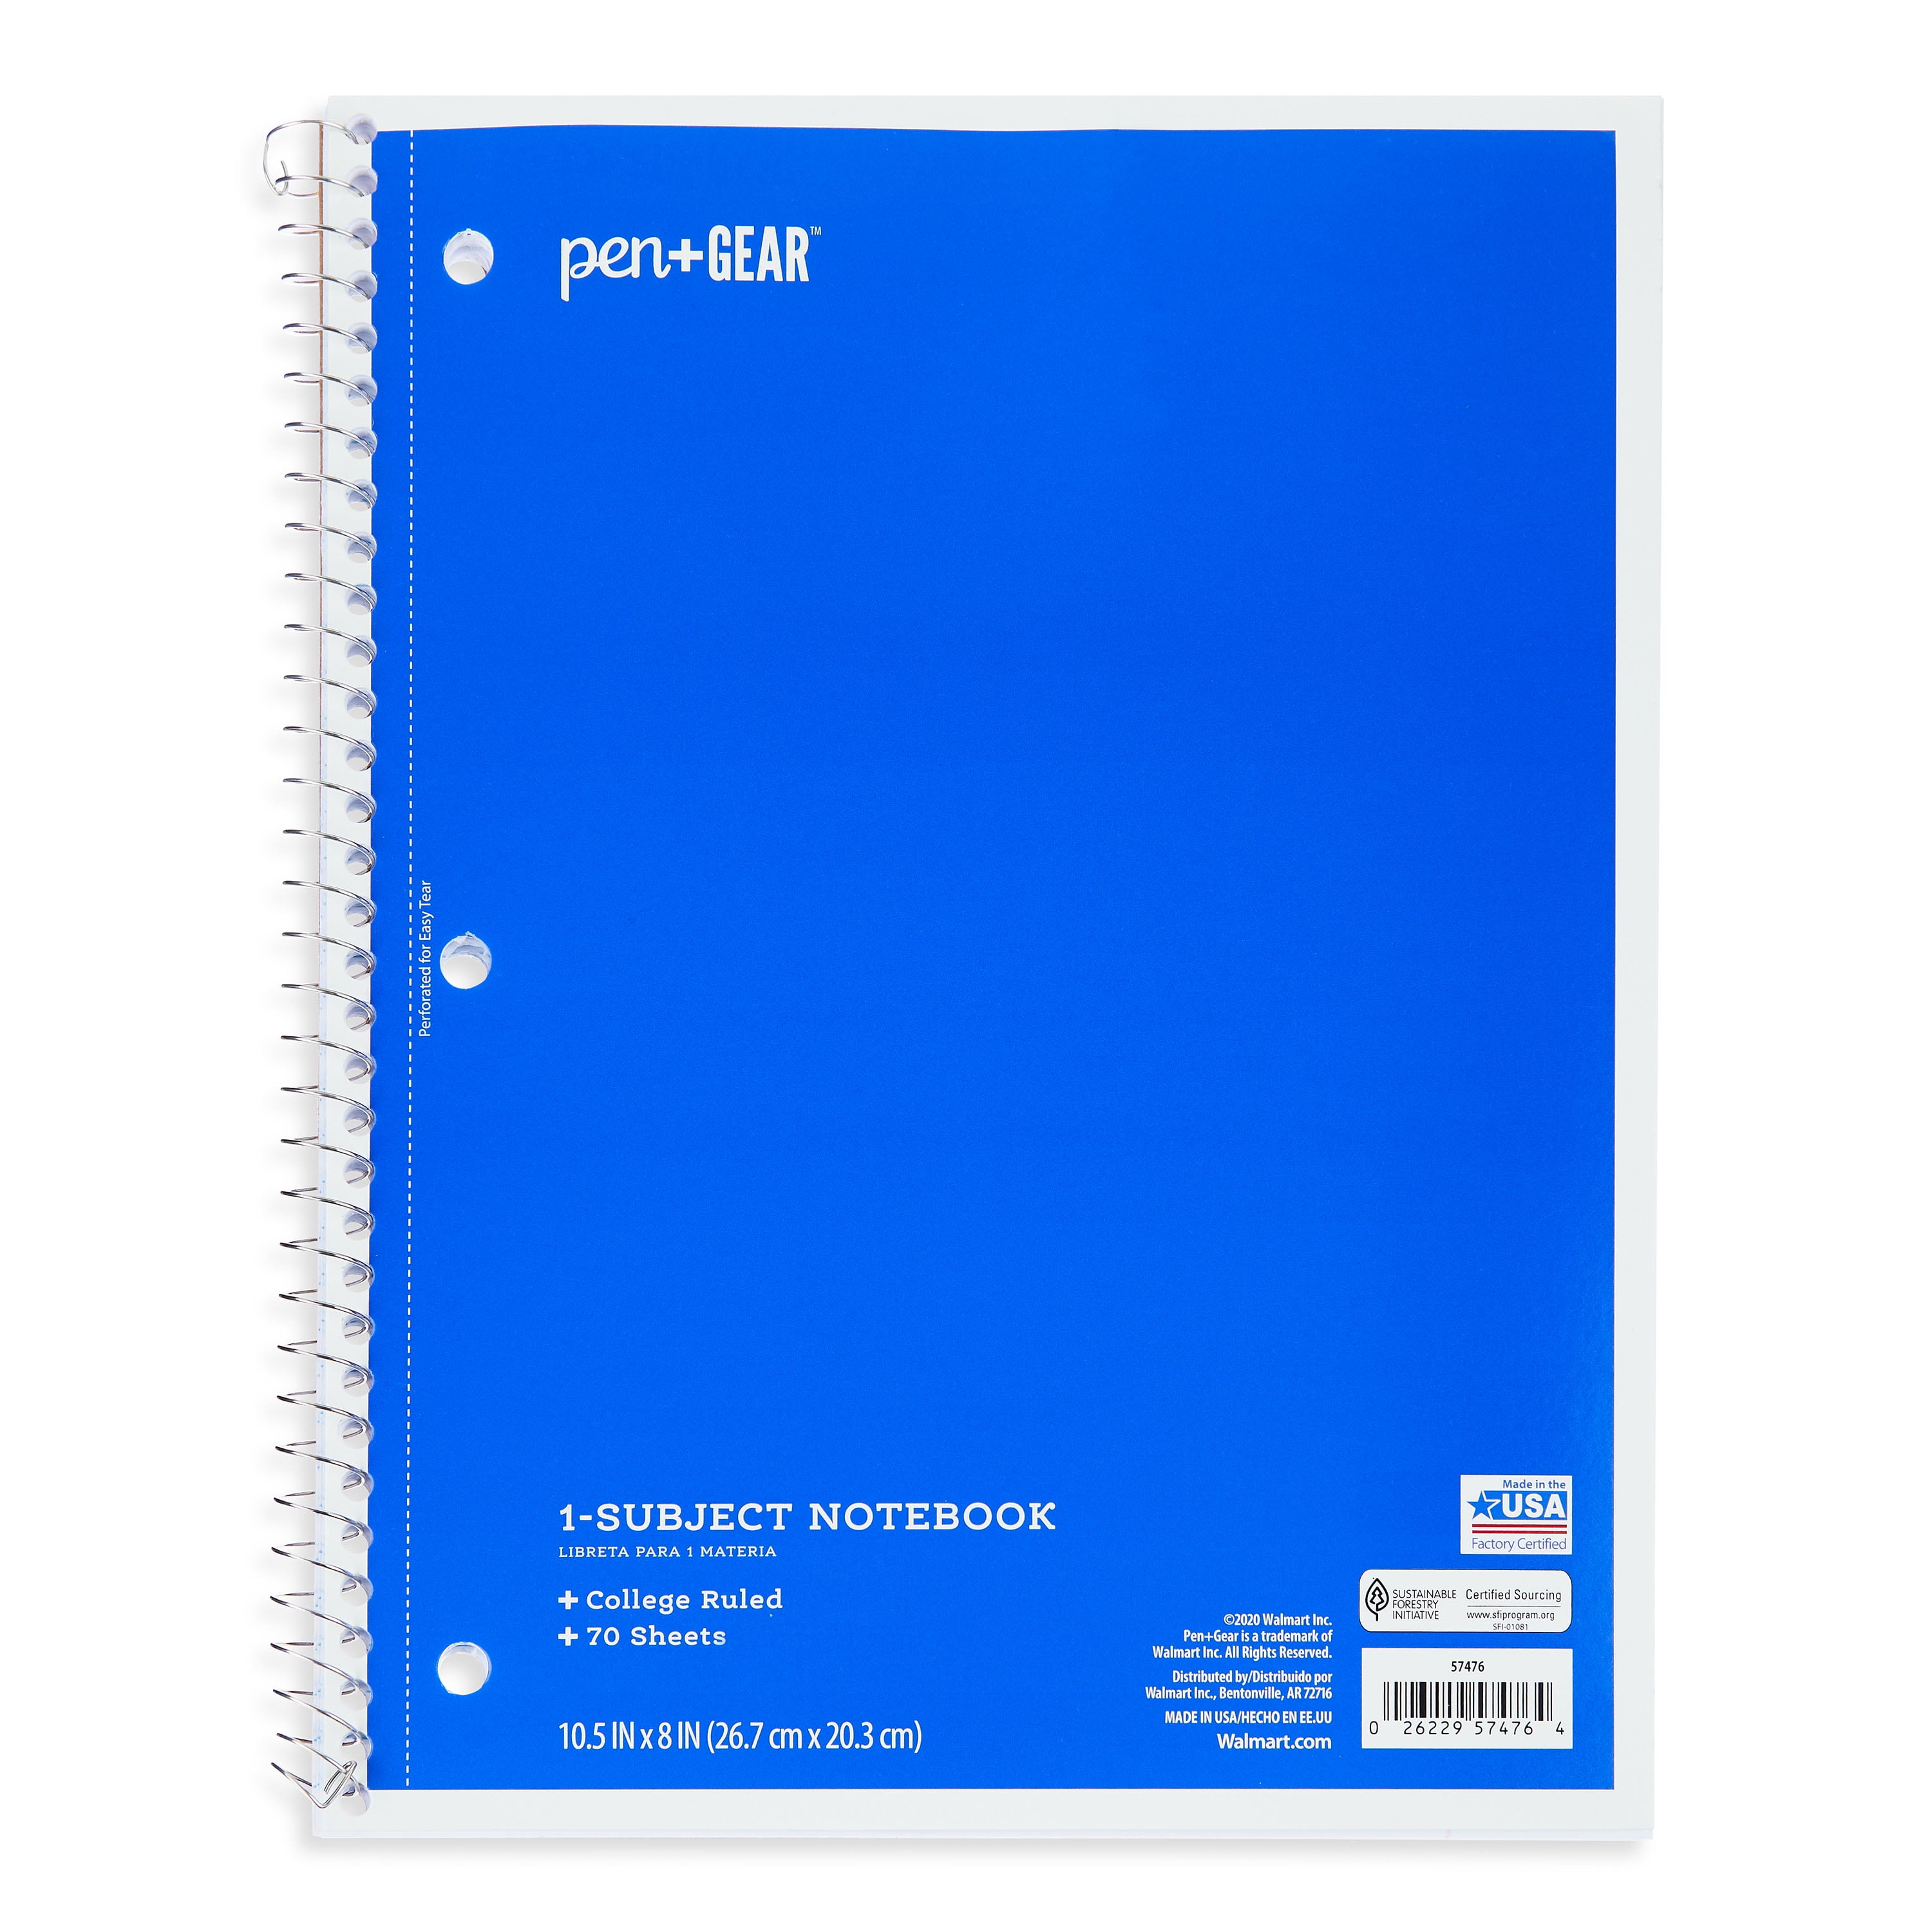 Pen+Gear 1-Subject Notebook, College Ruled, Blue, 70 Sheets